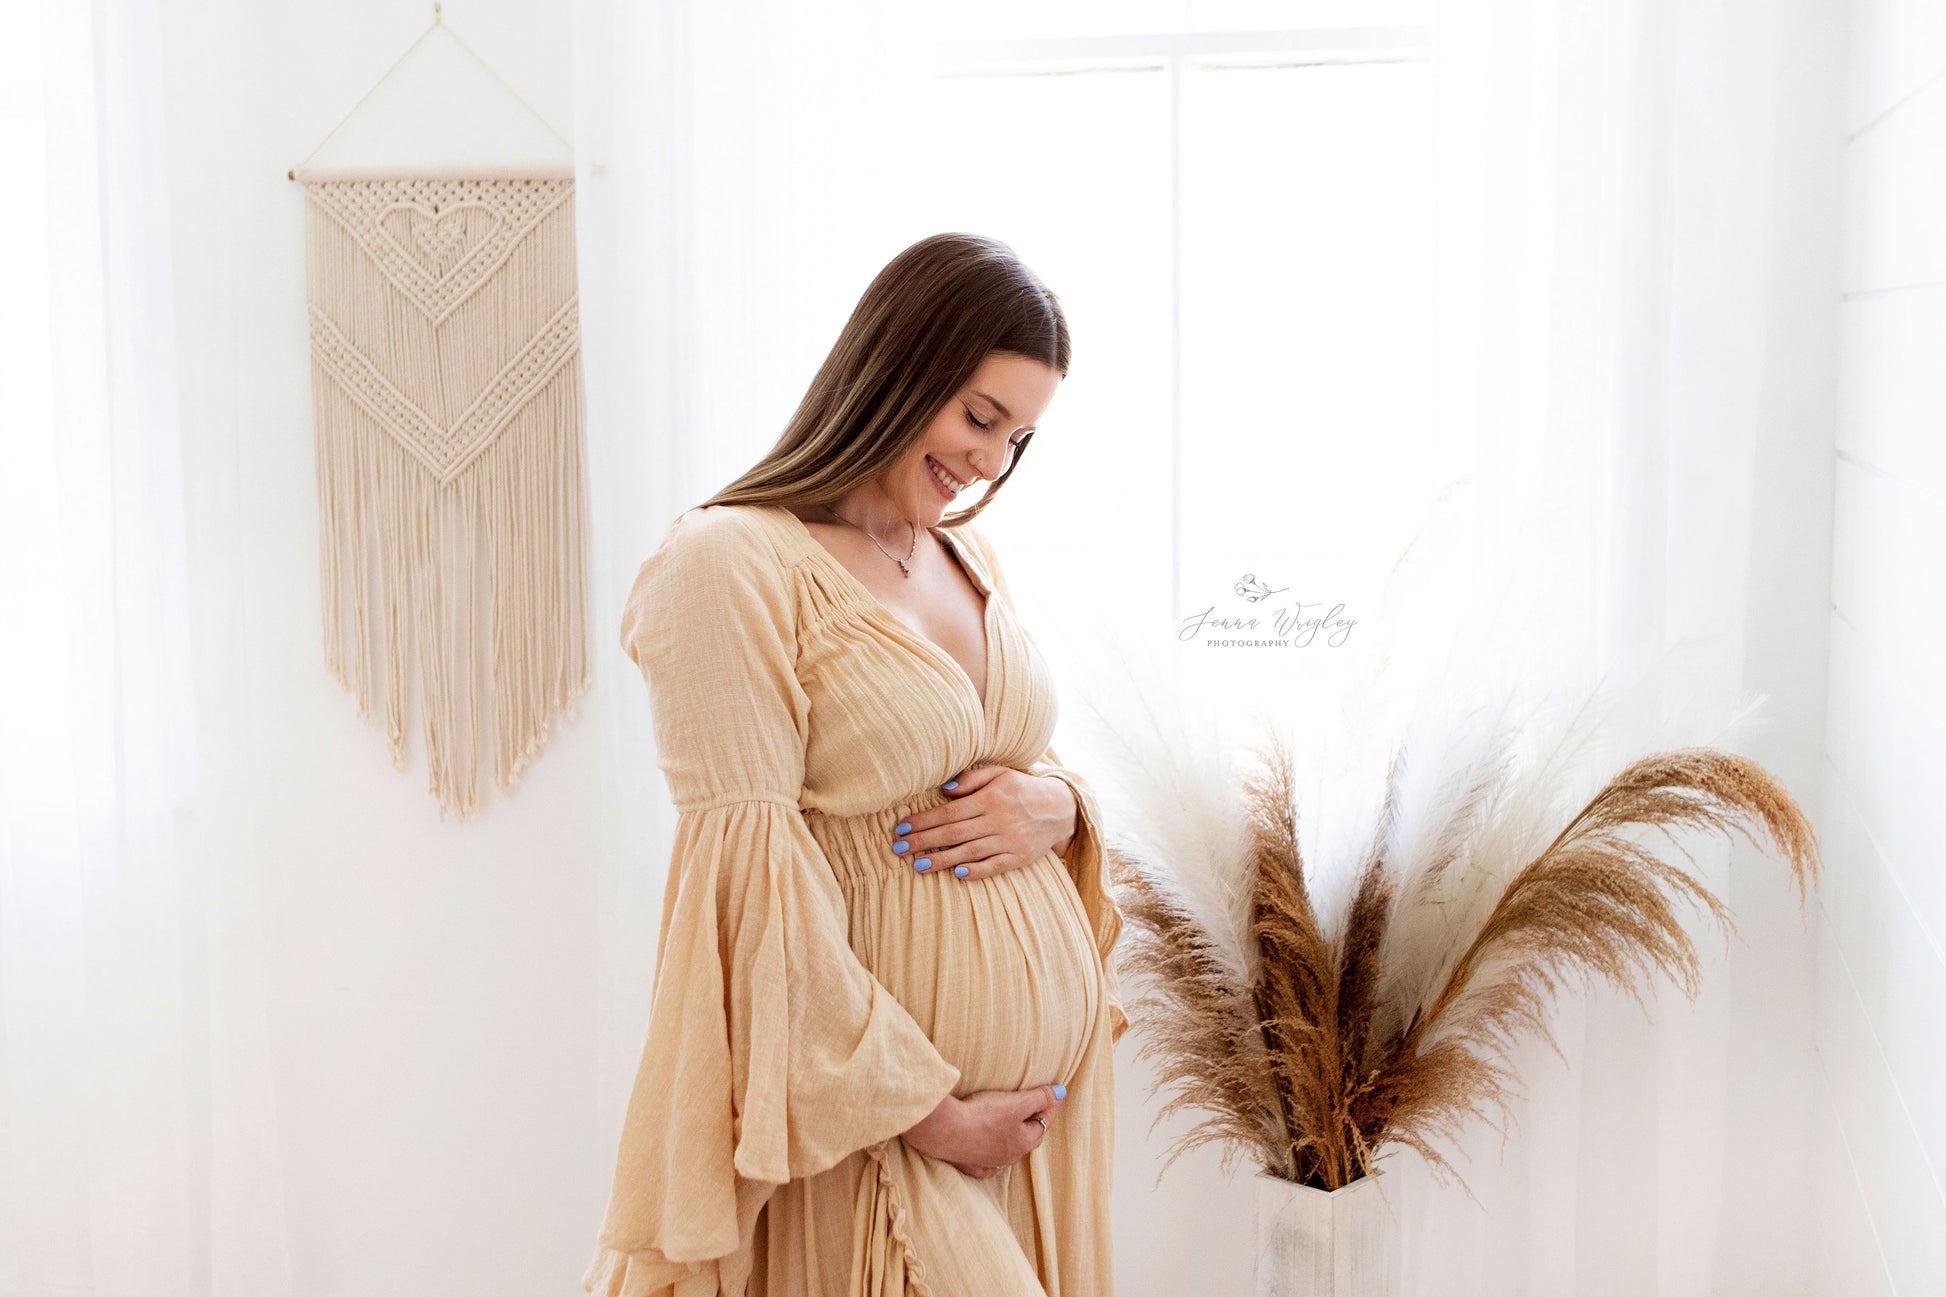 Reclamation Alive and Well Gown - maternity photoshoot dress